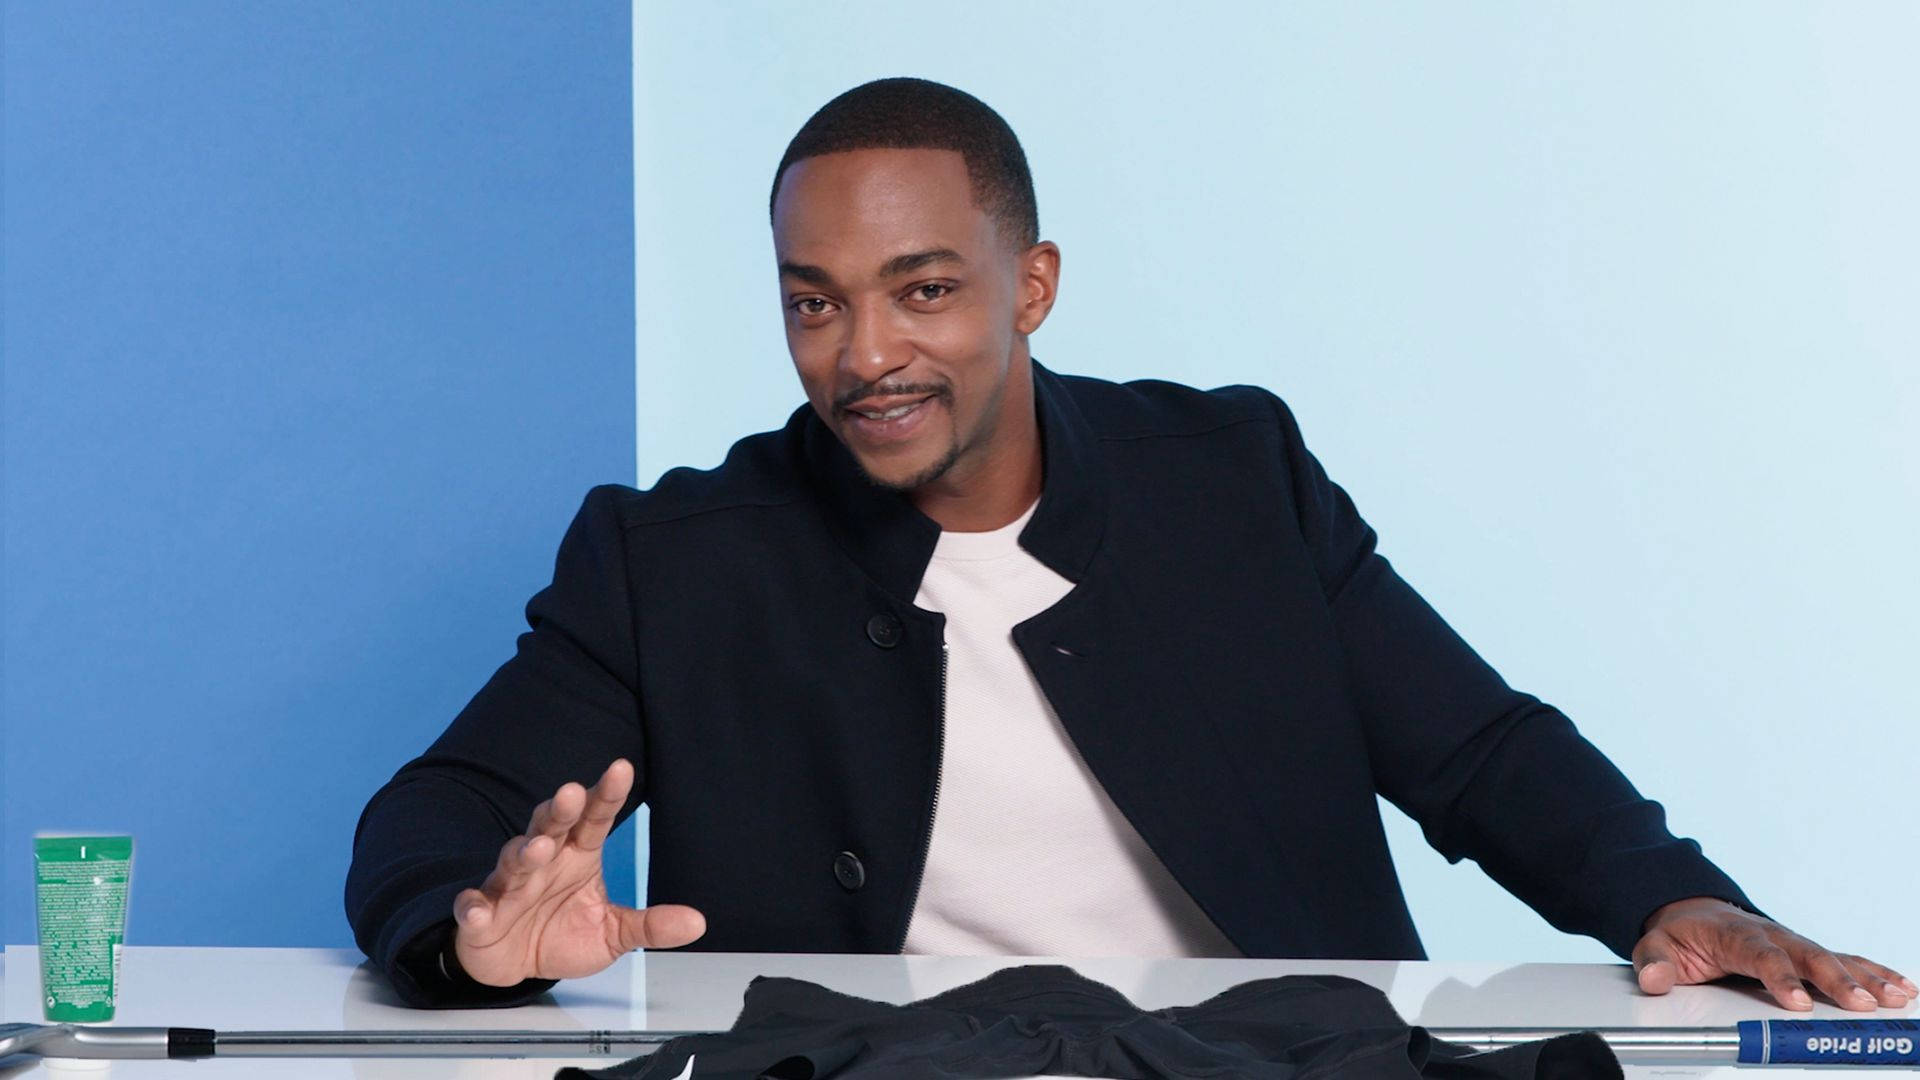 Anthony Mackie Gq Interview Background